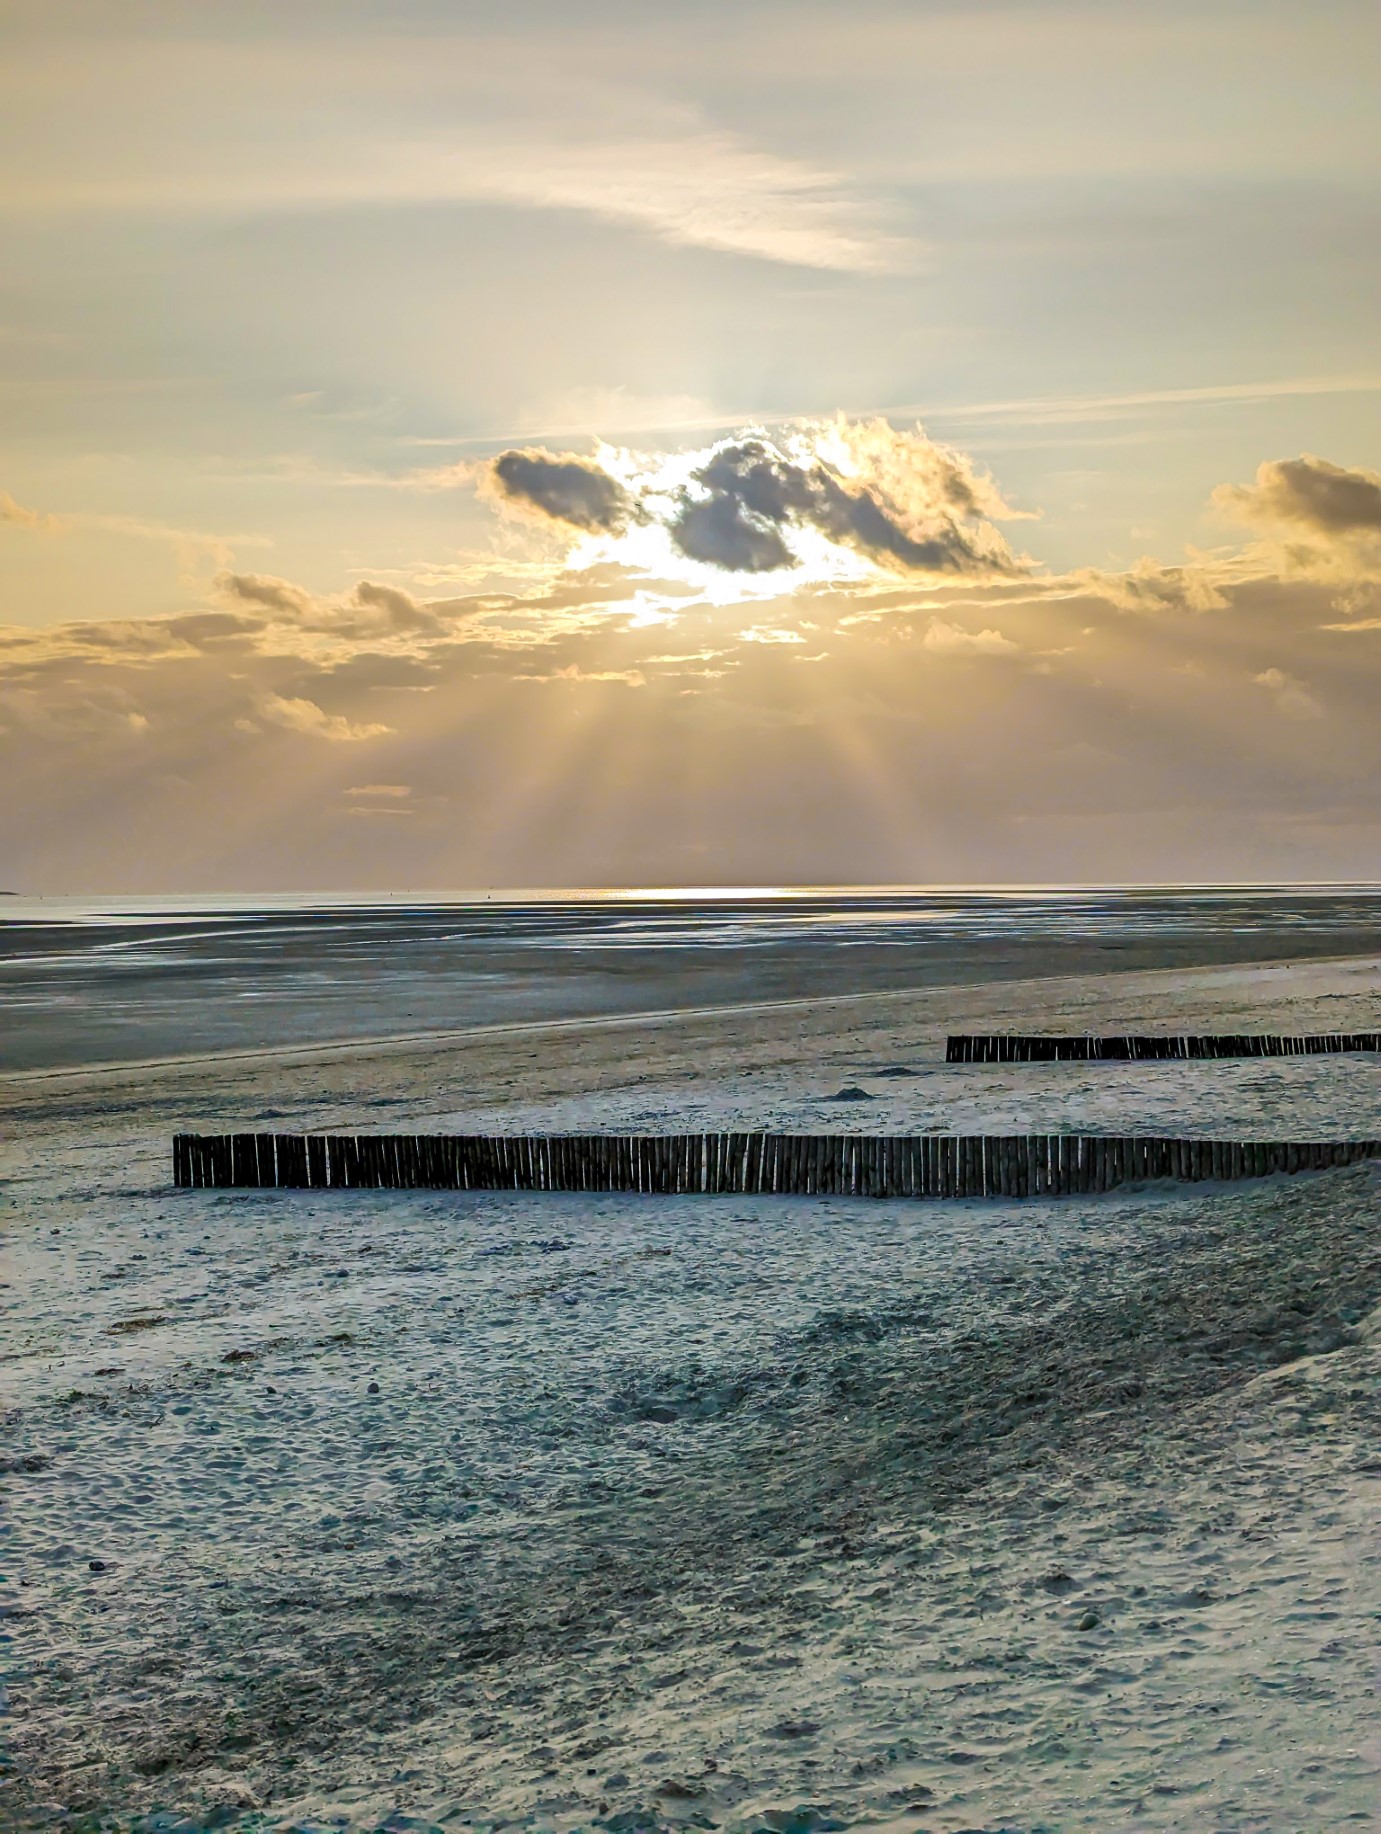 You are standing on the beach at Le Crotoy, France. In front of you there are two rows of wooden wave breakers. Behind them is France's largest estuary, the Bay of the Somme. It is low tide and the sand stretches out as far as the eye can see. The sun is setting. 